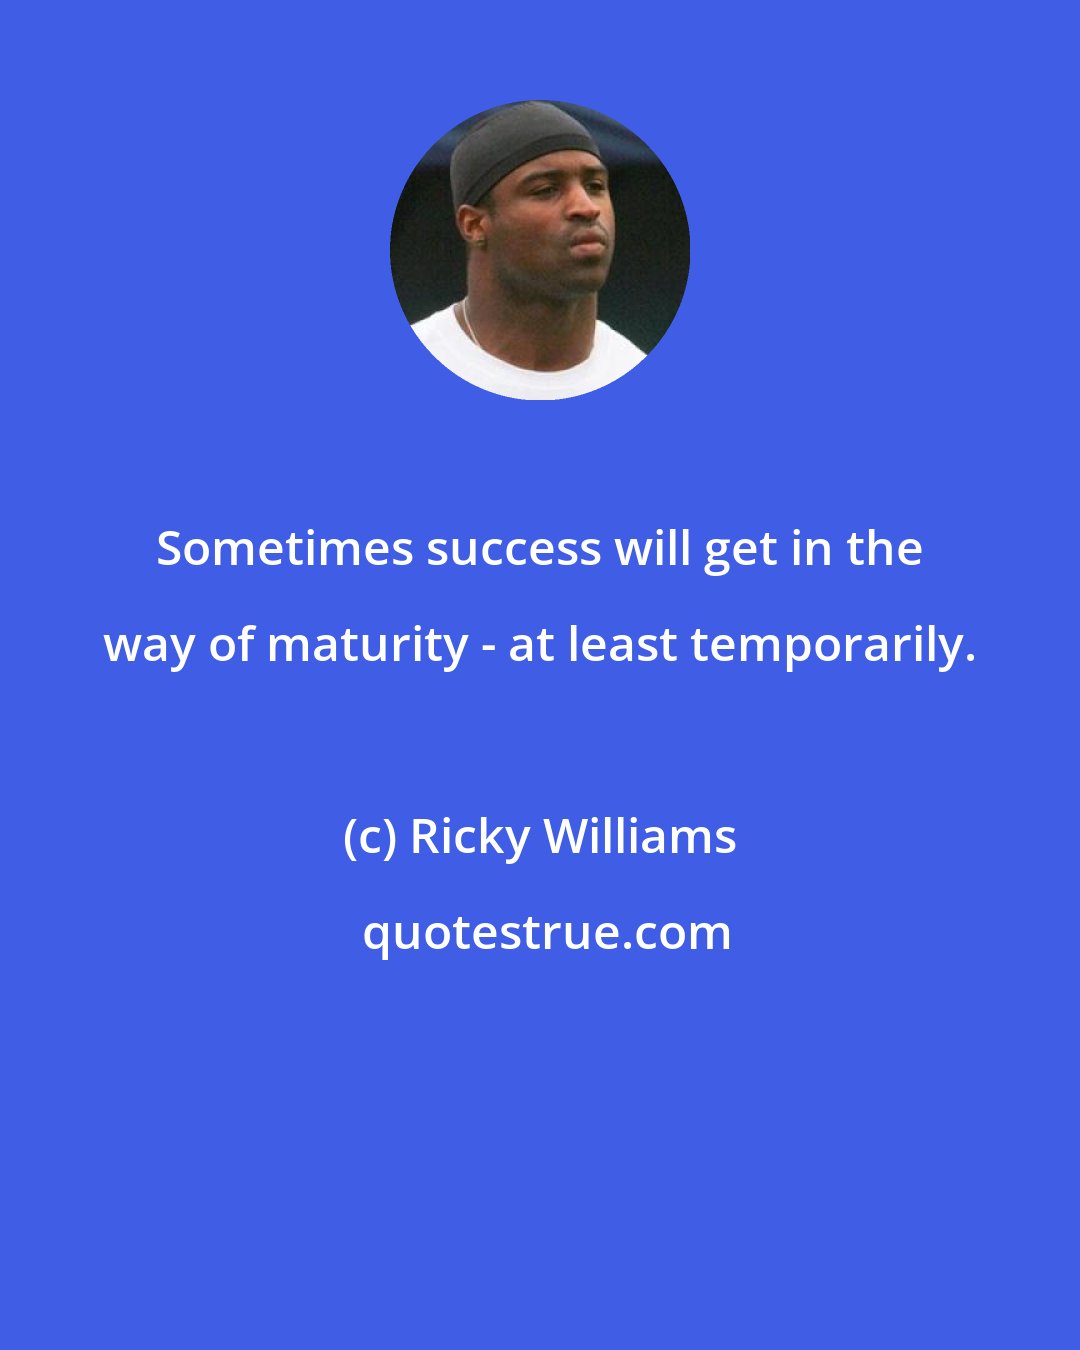 Ricky Williams: Sometimes success will get in the way of maturity - at least temporarily.